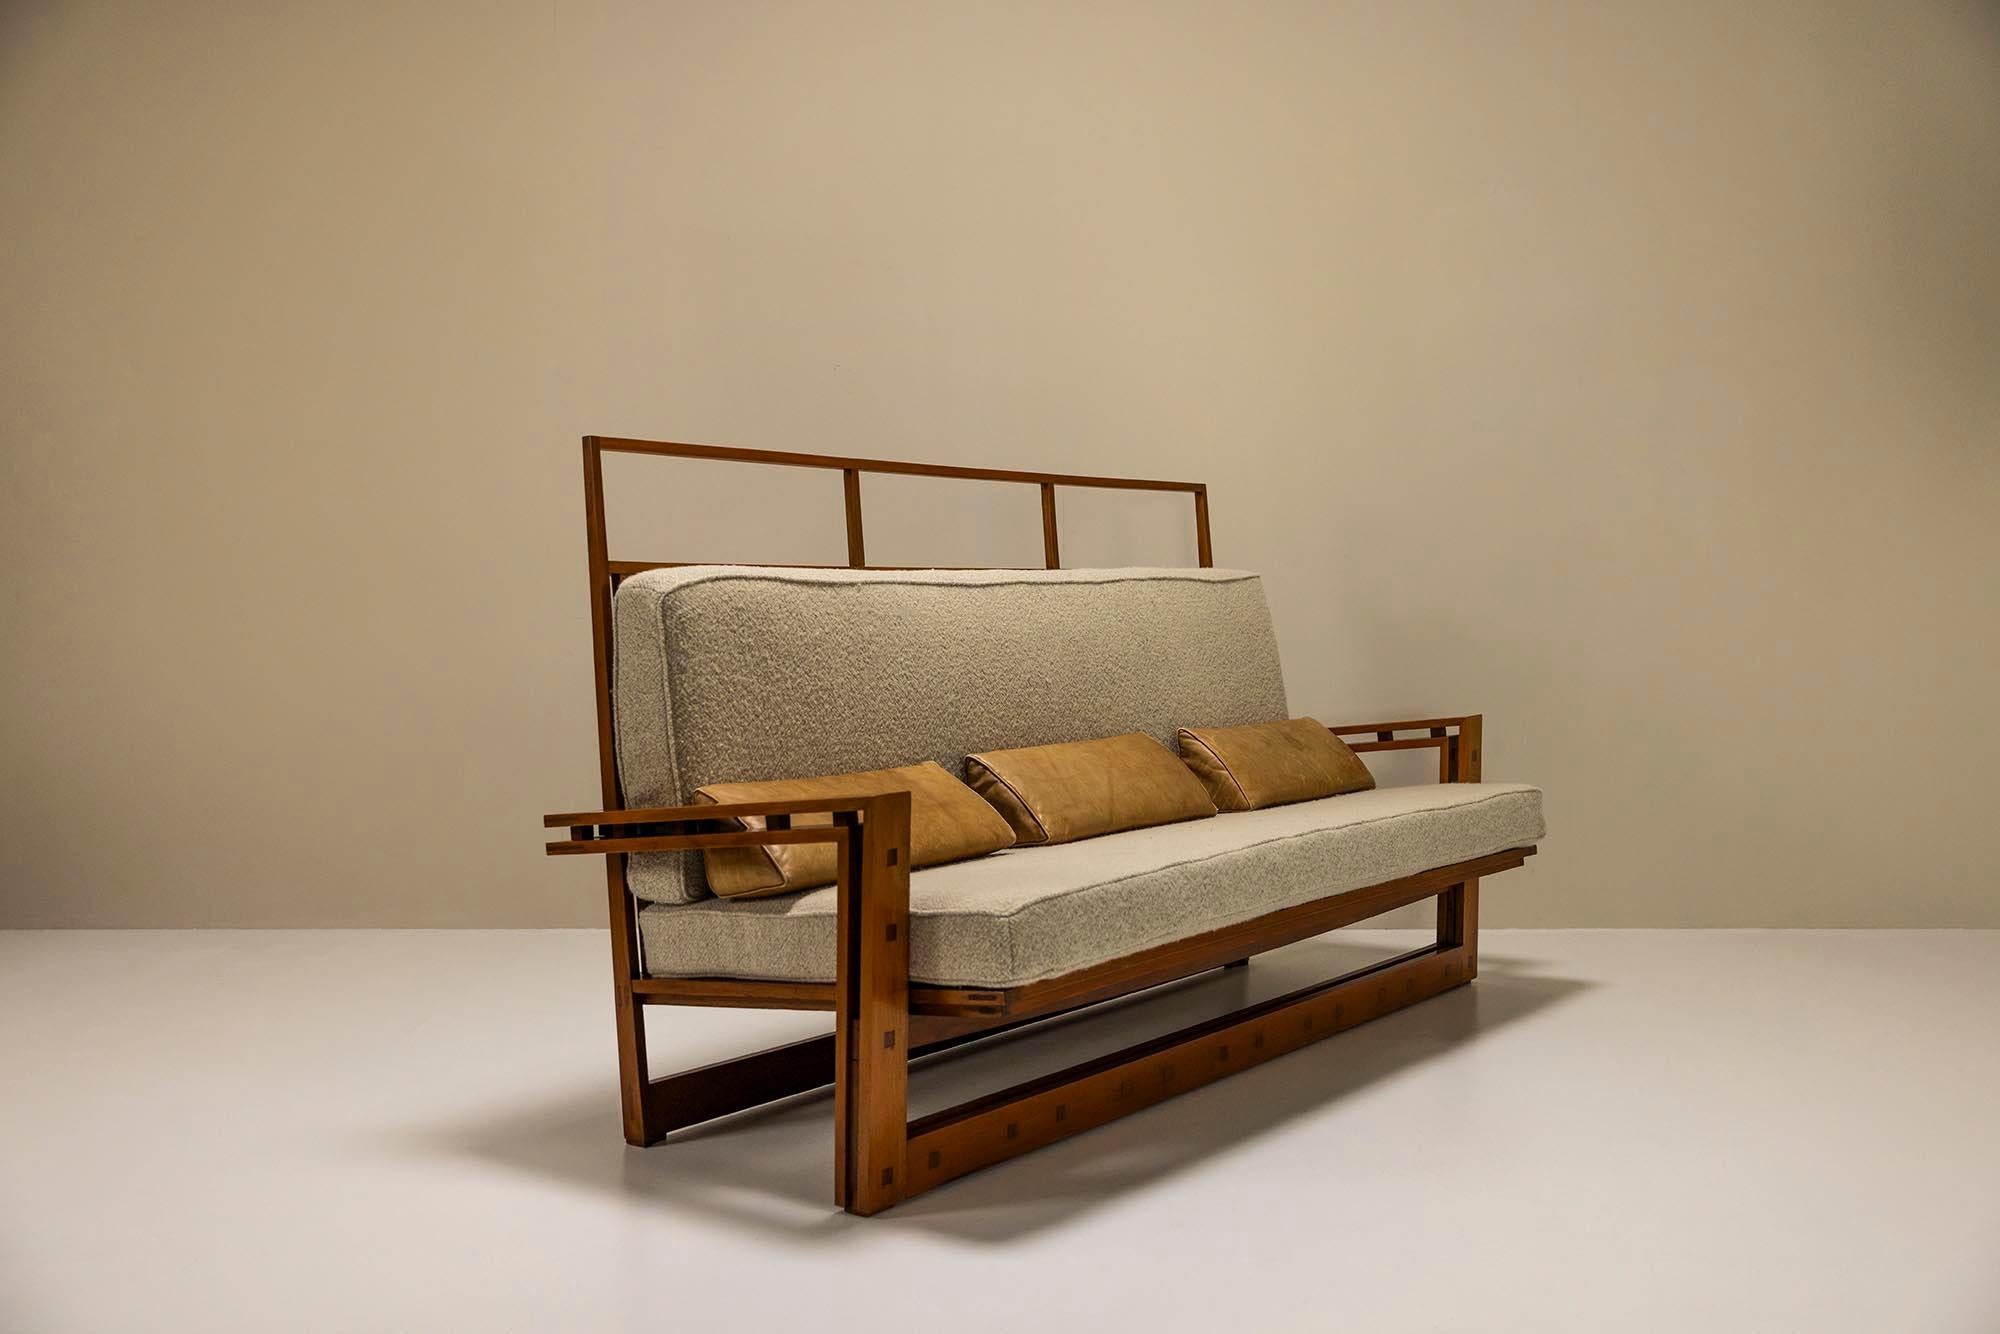 Three Seater Sofa In Solid Ash And Mansonia Wood By Fausto Bontempi, Italy 1961 For Sale